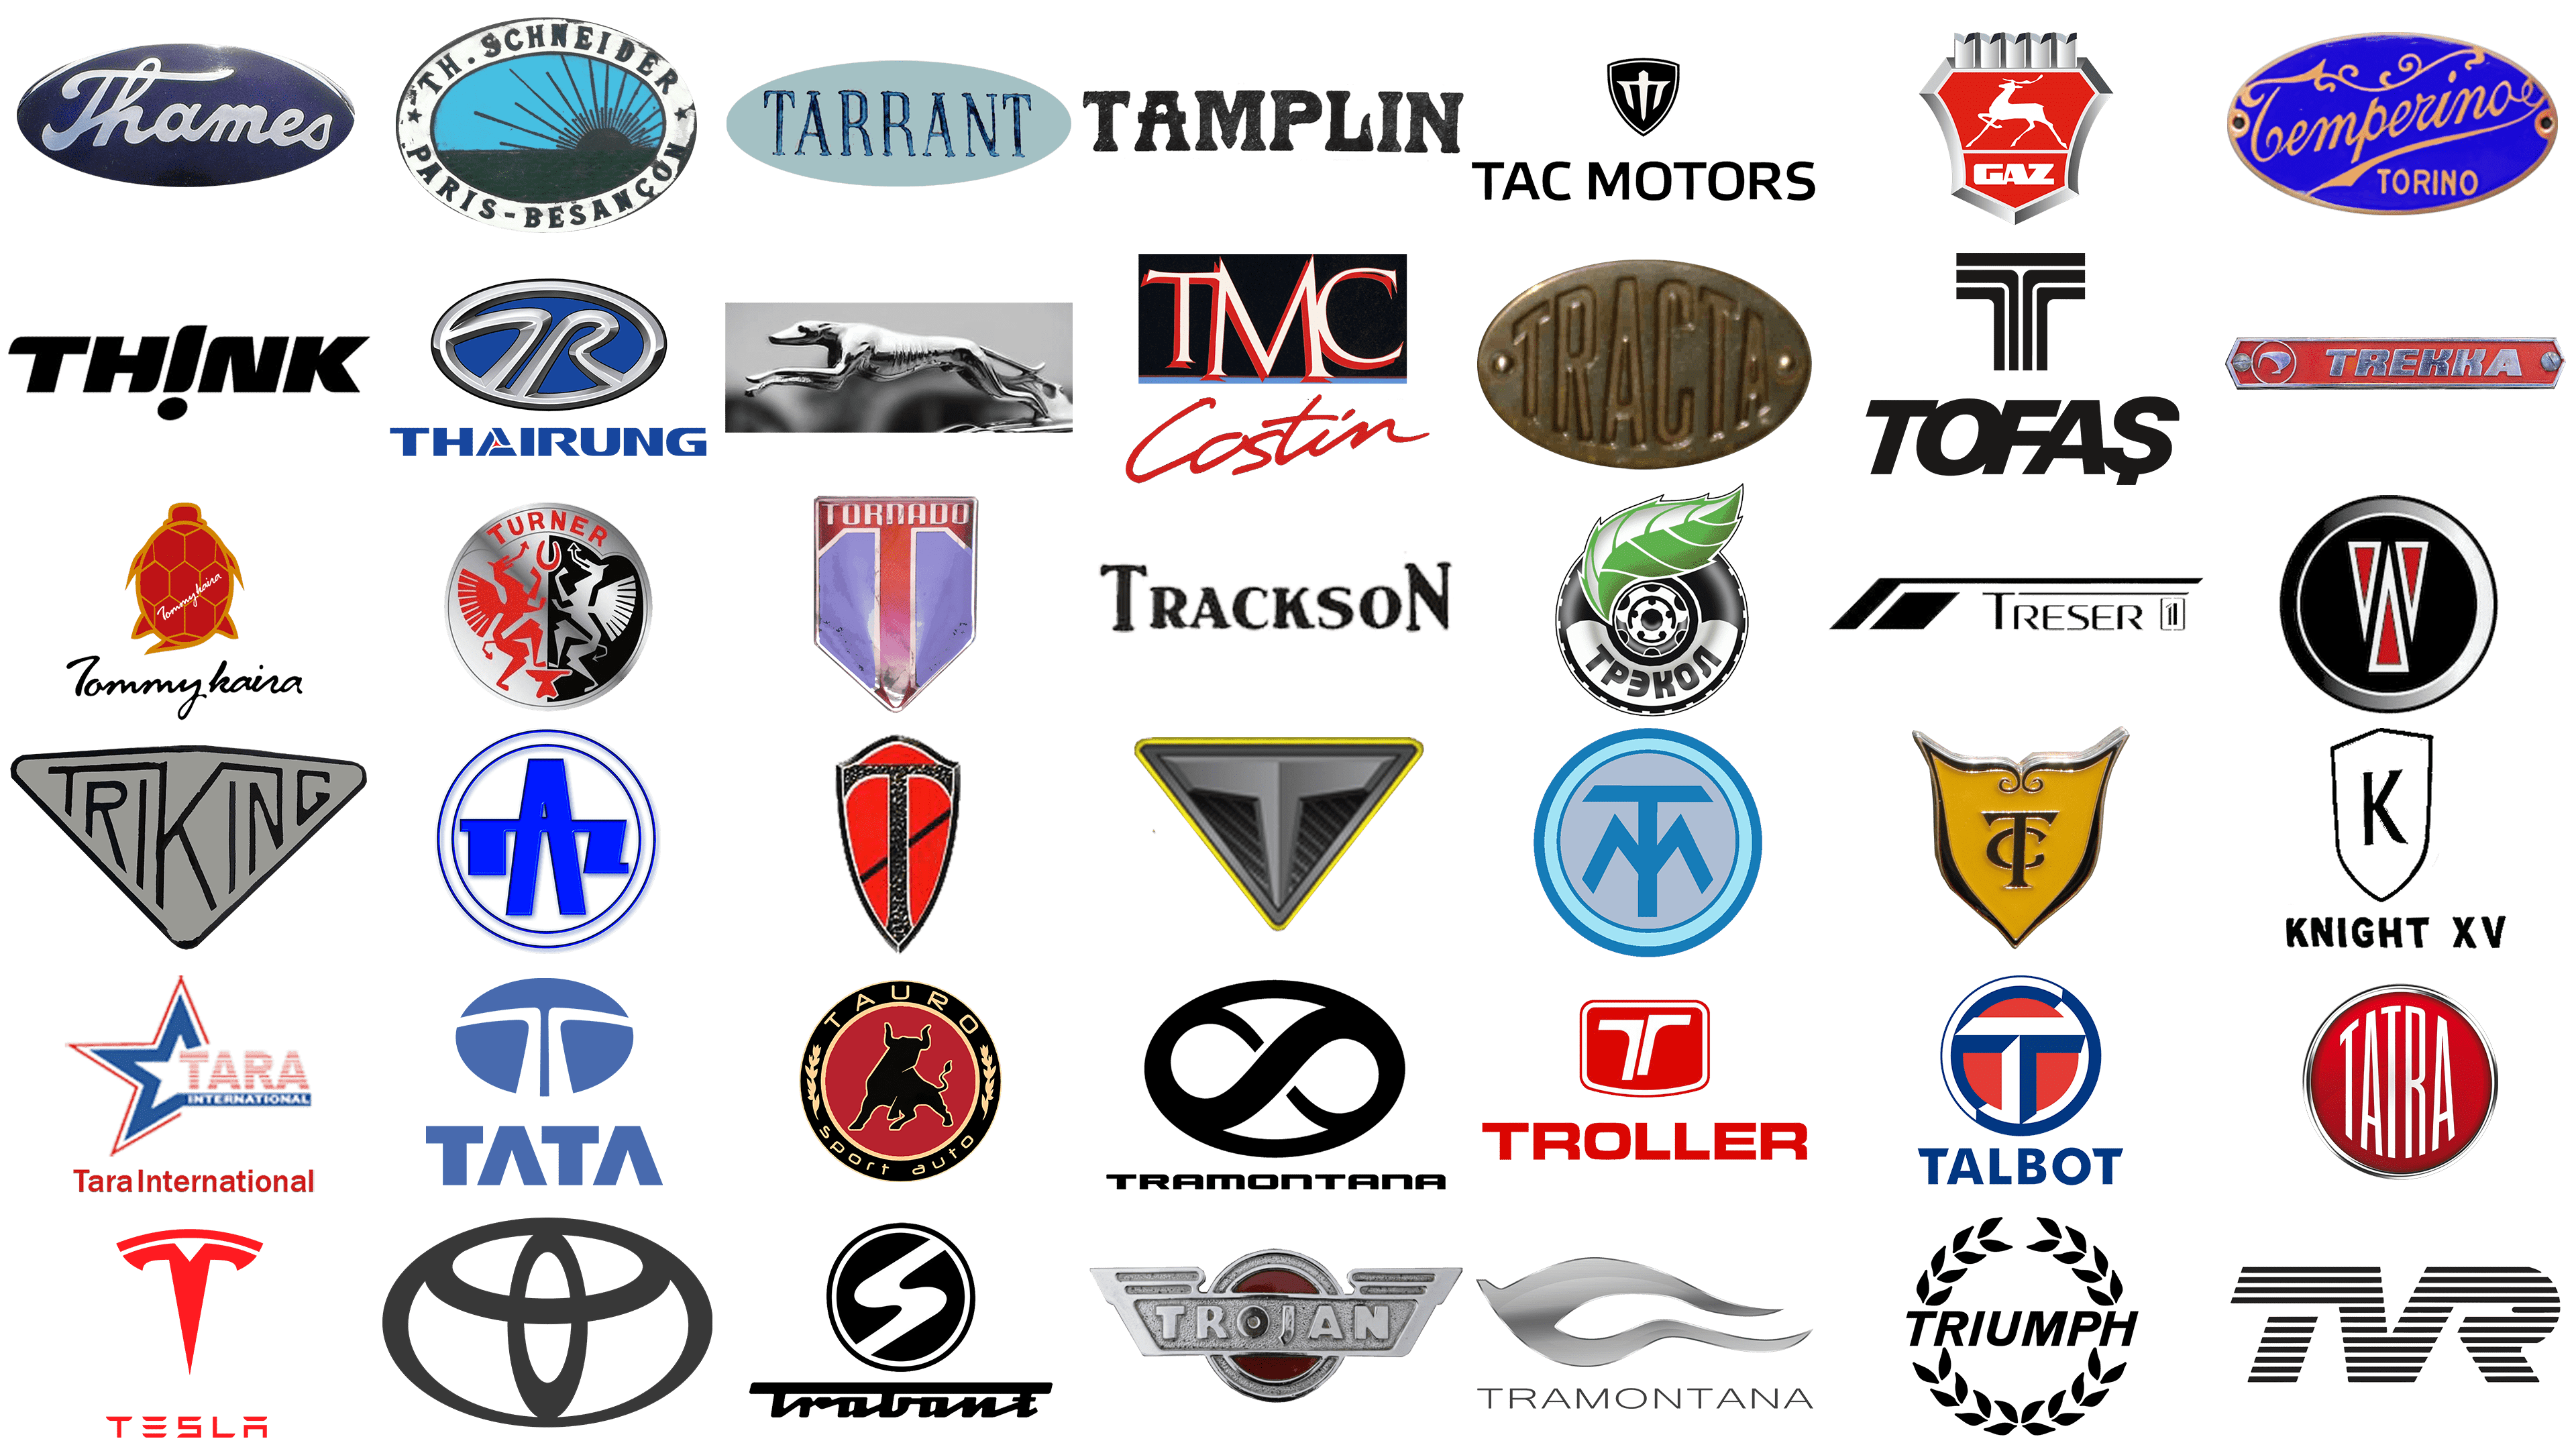 Car brands and logos that start with T